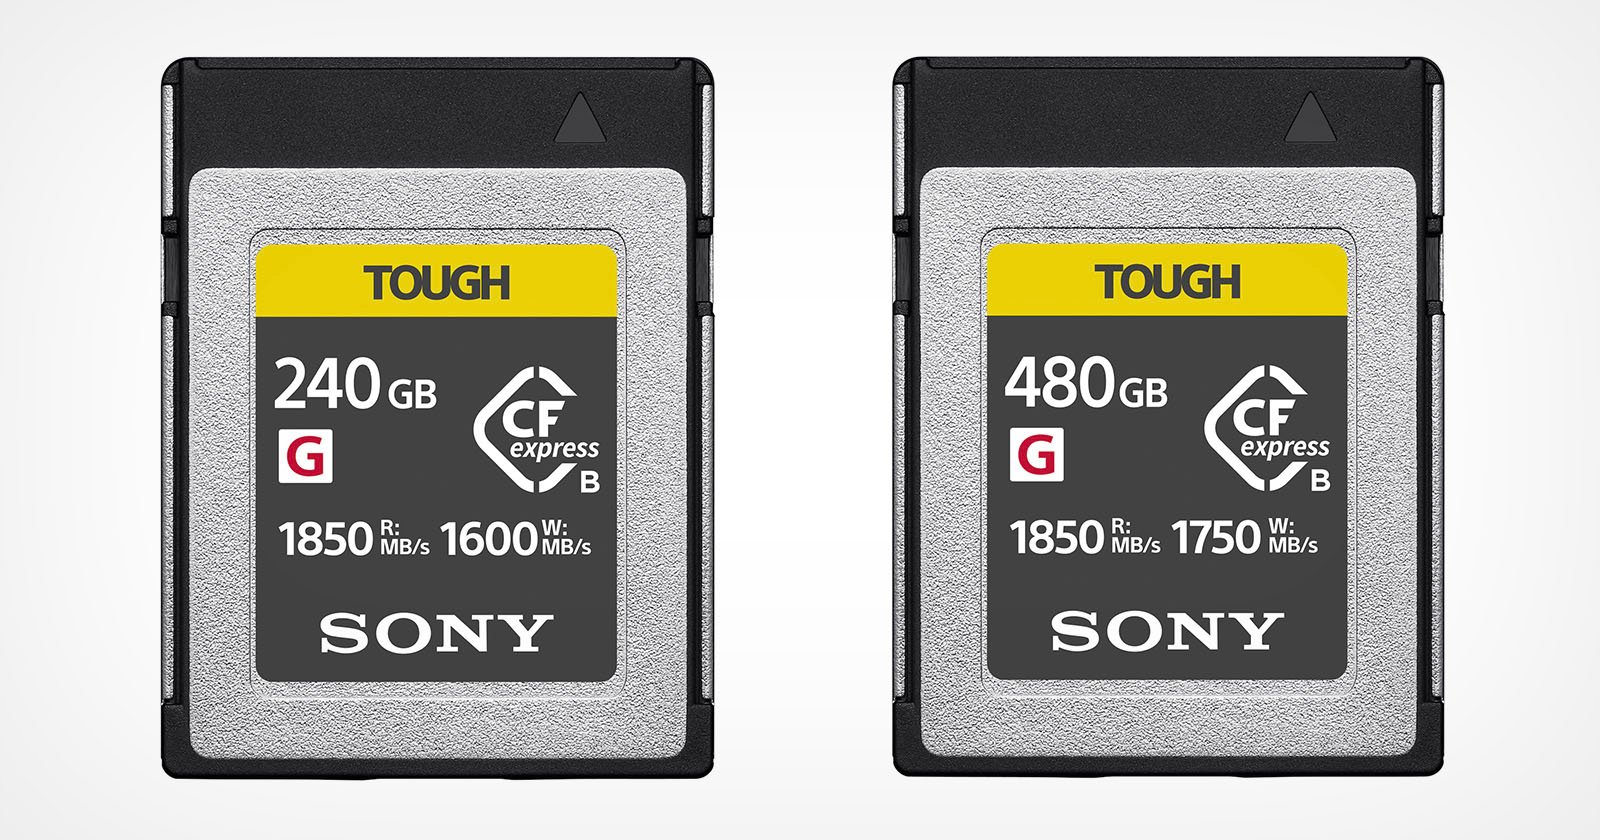 Sonys New Tough CFexpress Type B Cards Are Fast and Affordable